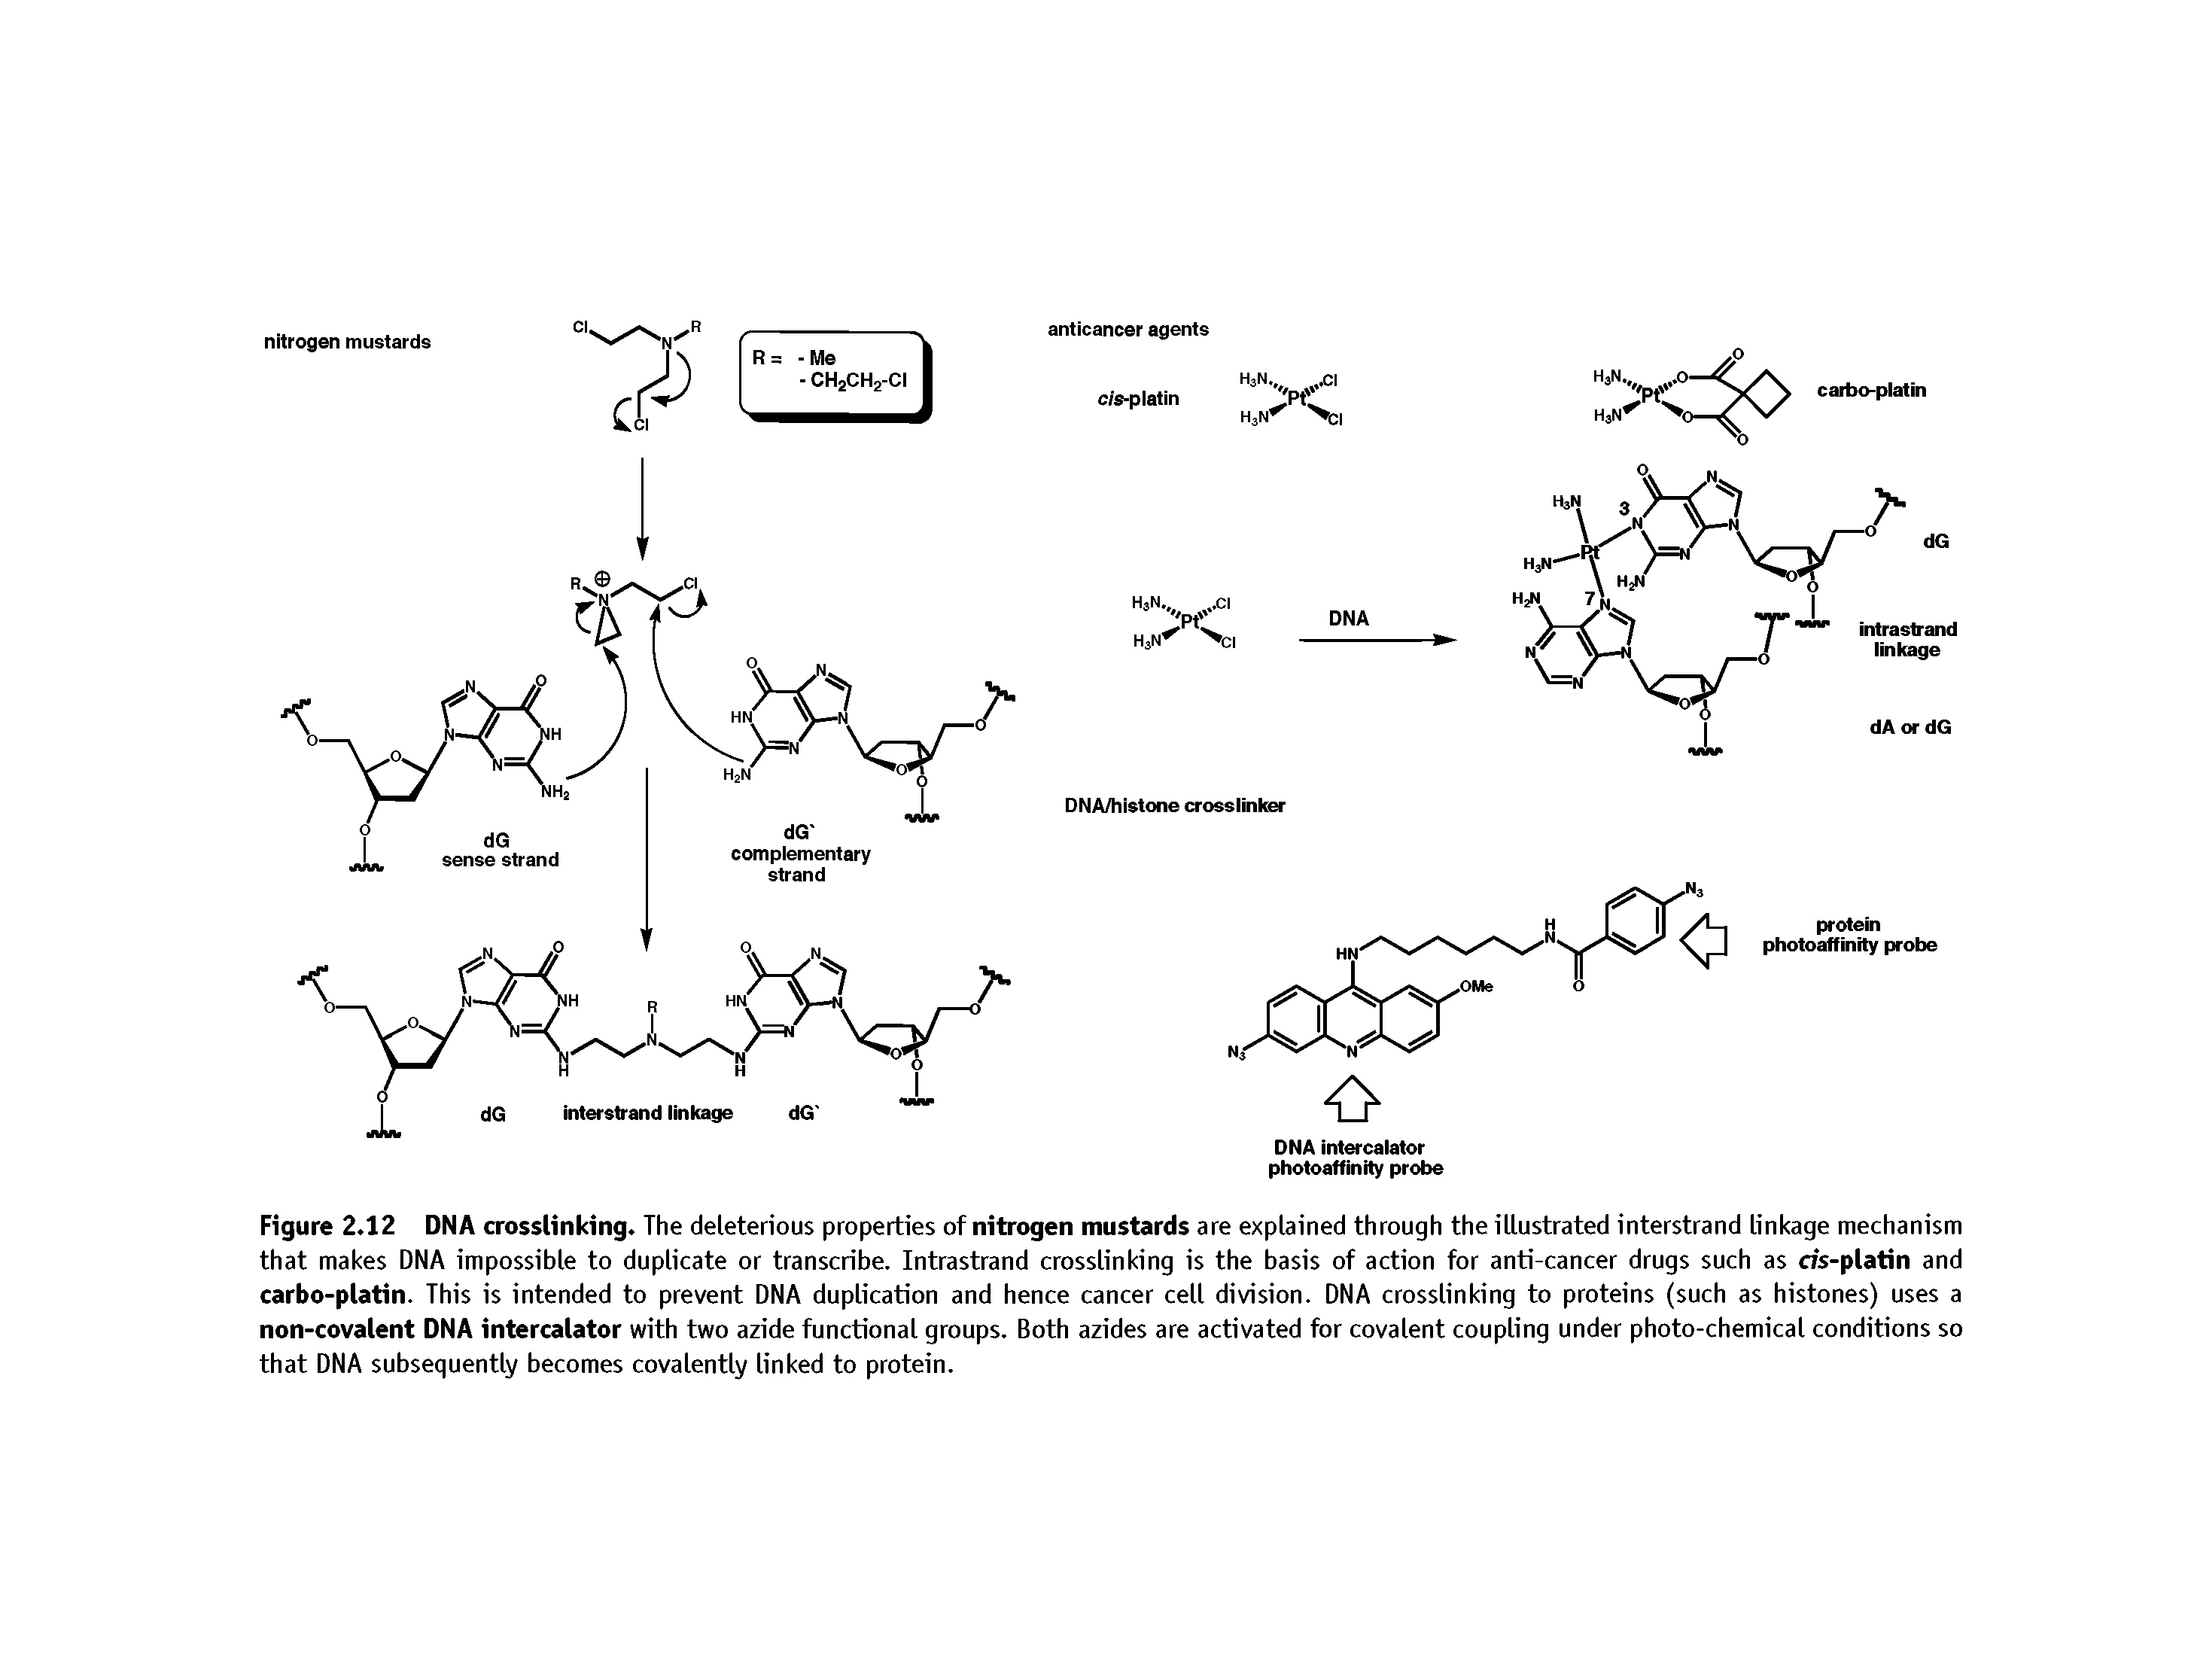 Figure 2.12 DNA crosslinking. The deleterious properties of nitrogen mustards are explained through the illustrated interstrand linkage mechanism that makes DNA impossible to duplicate or transcribe. Intrastrand crosslinking is the basis of action for anti-cancer drugs such as c/s-platin and carbo-platin. This is intended to prevent DNA duplication and hence cancer cell division. DNA crosslinking to proteins (such as histones) uses a non-covalent DNA intercalator with two azide functional groups. Both azides are activated for covalent coupling under photo-chemical conditions so that DNA subsequently becomes covalently linked to protein.